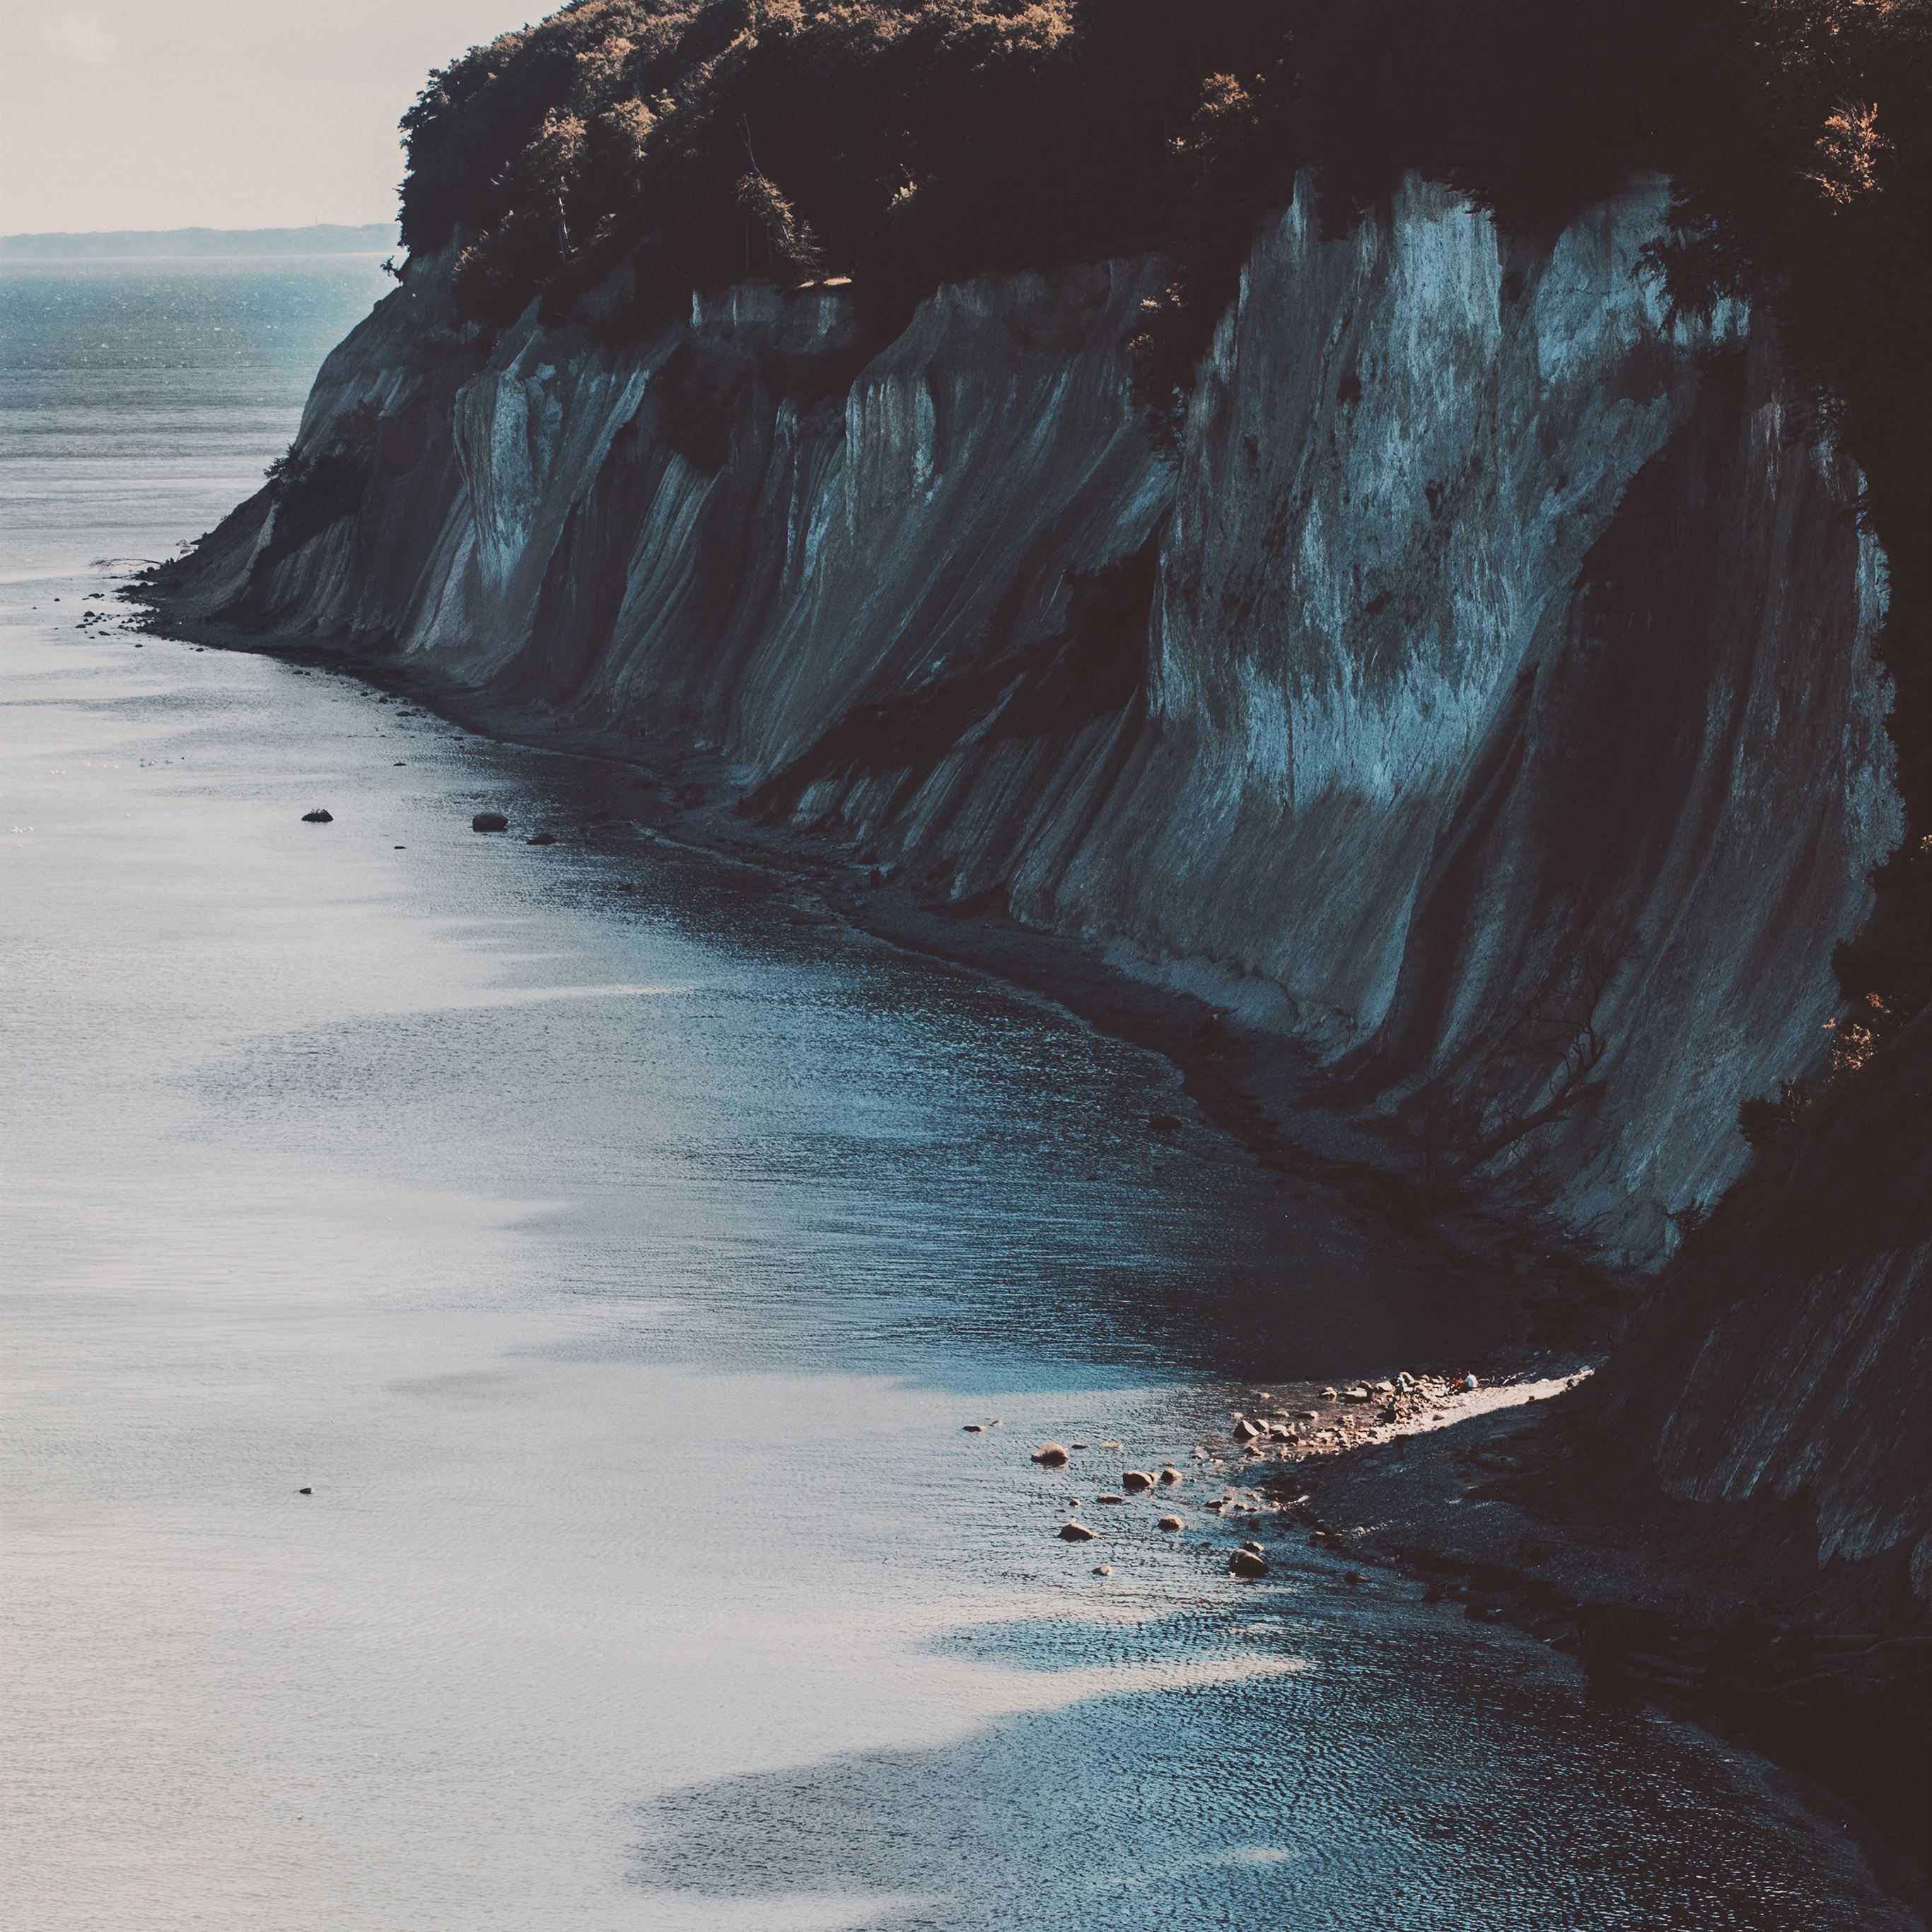 A rocky cliff overlooking a body of water. - Ocean, coast